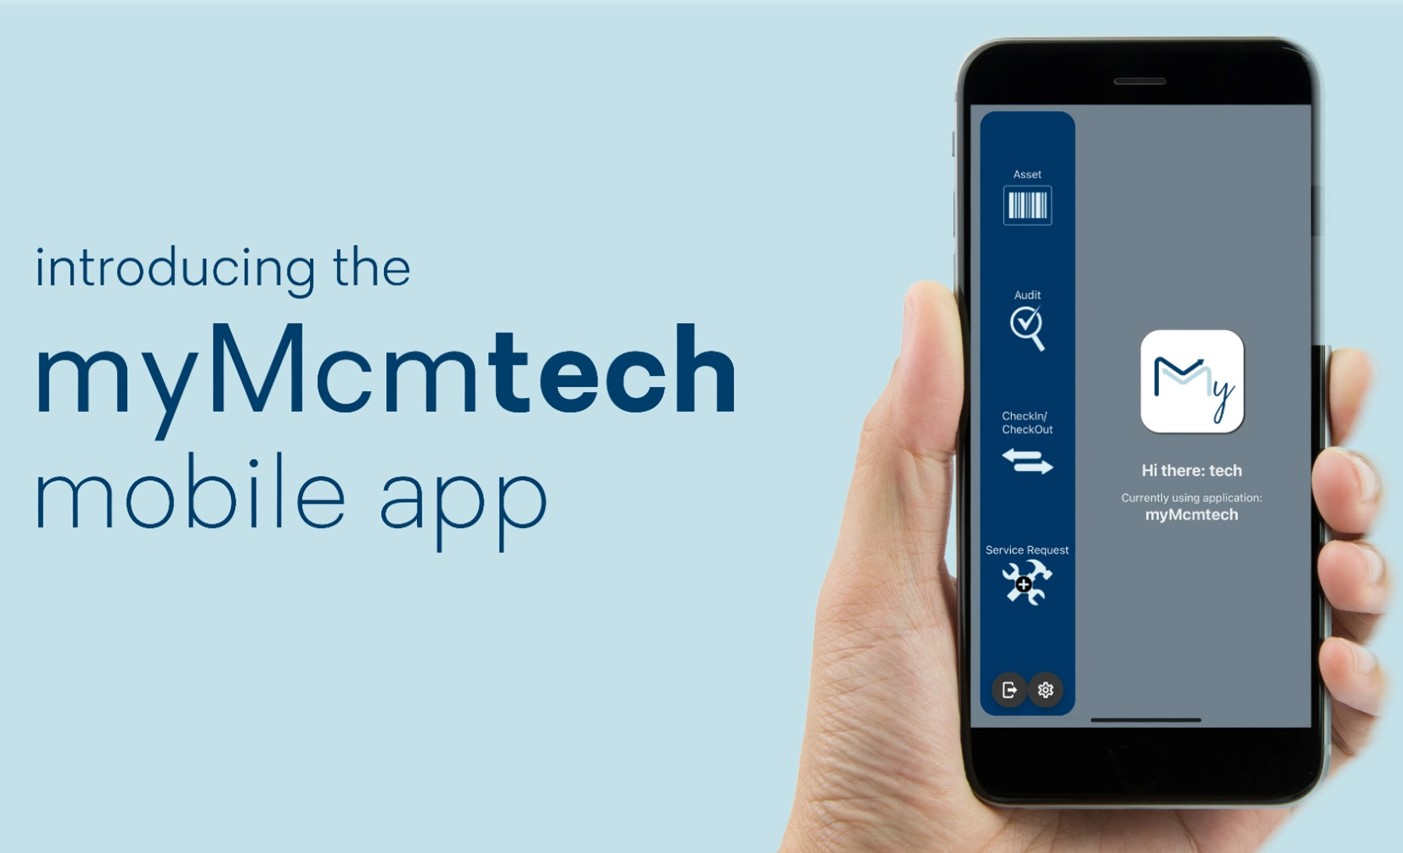 MyMcmtech mobile app to connect to your mission-critical asset, inventory and work orders management solutions in the field